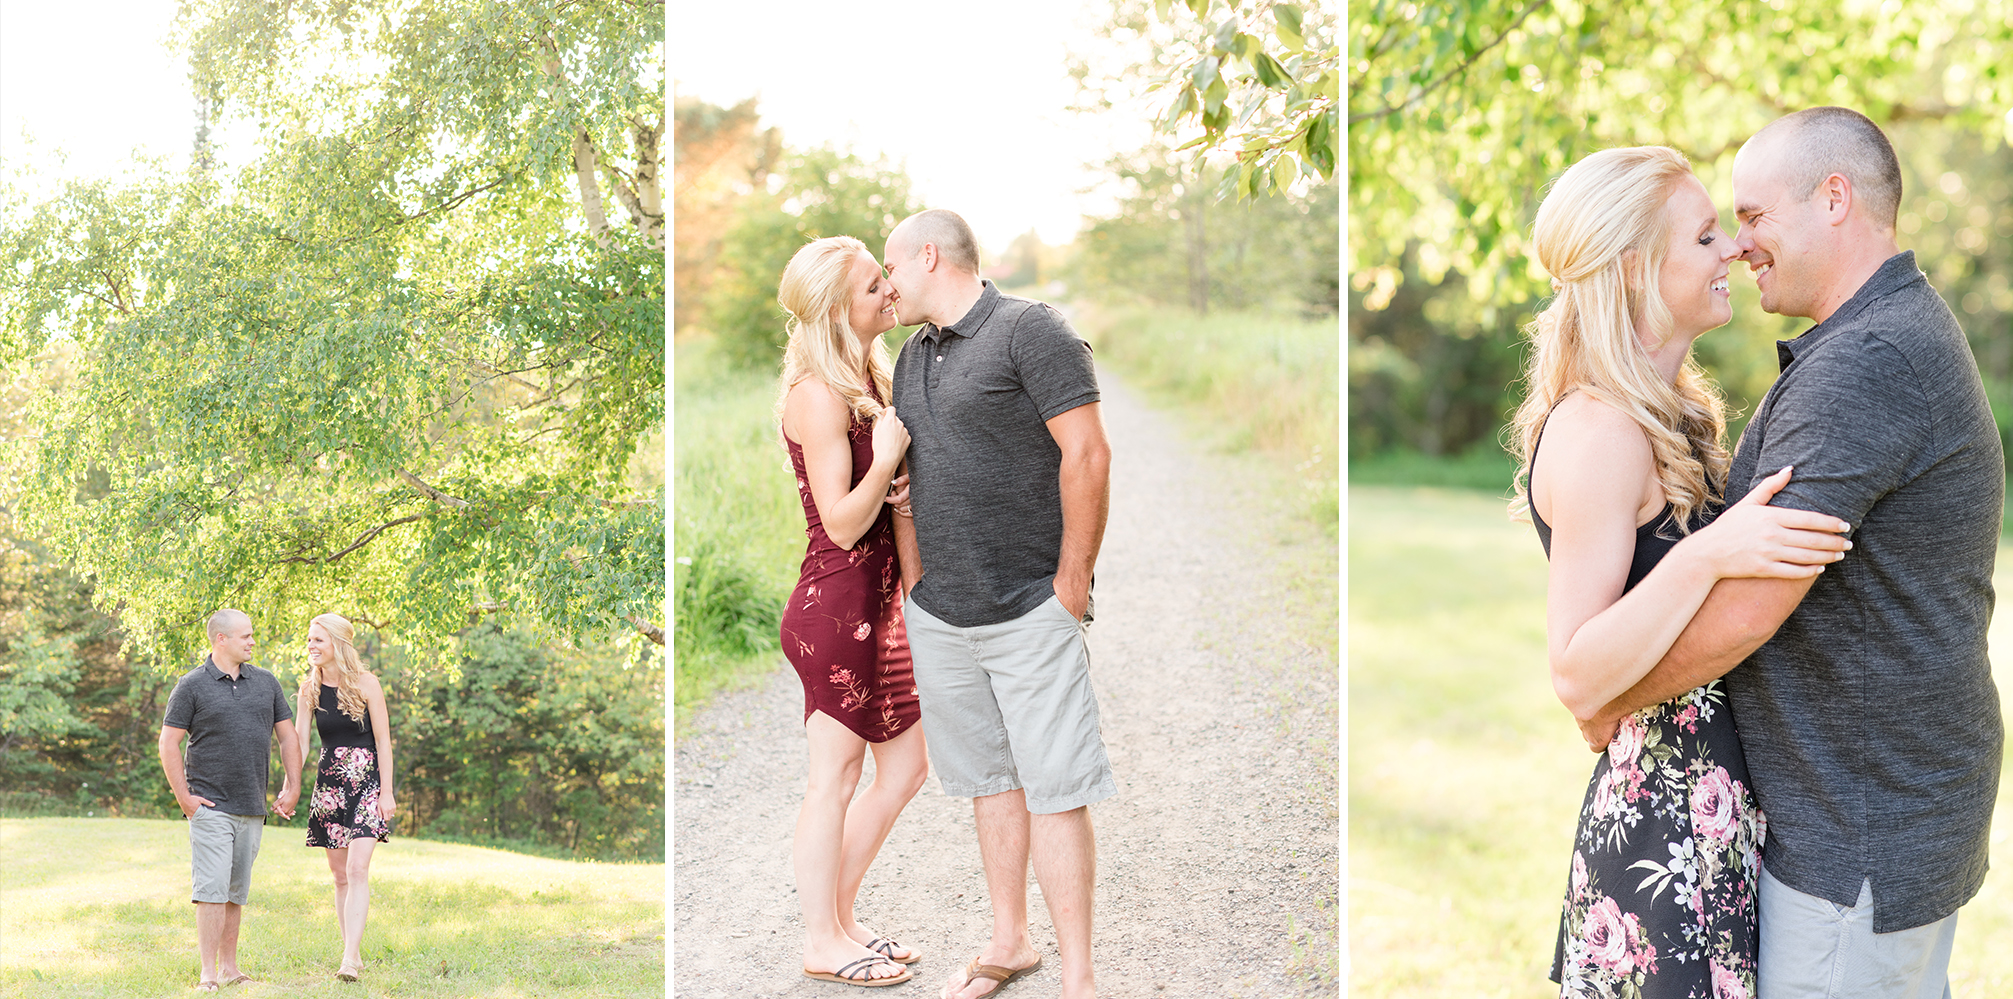 A fun summer engagement session